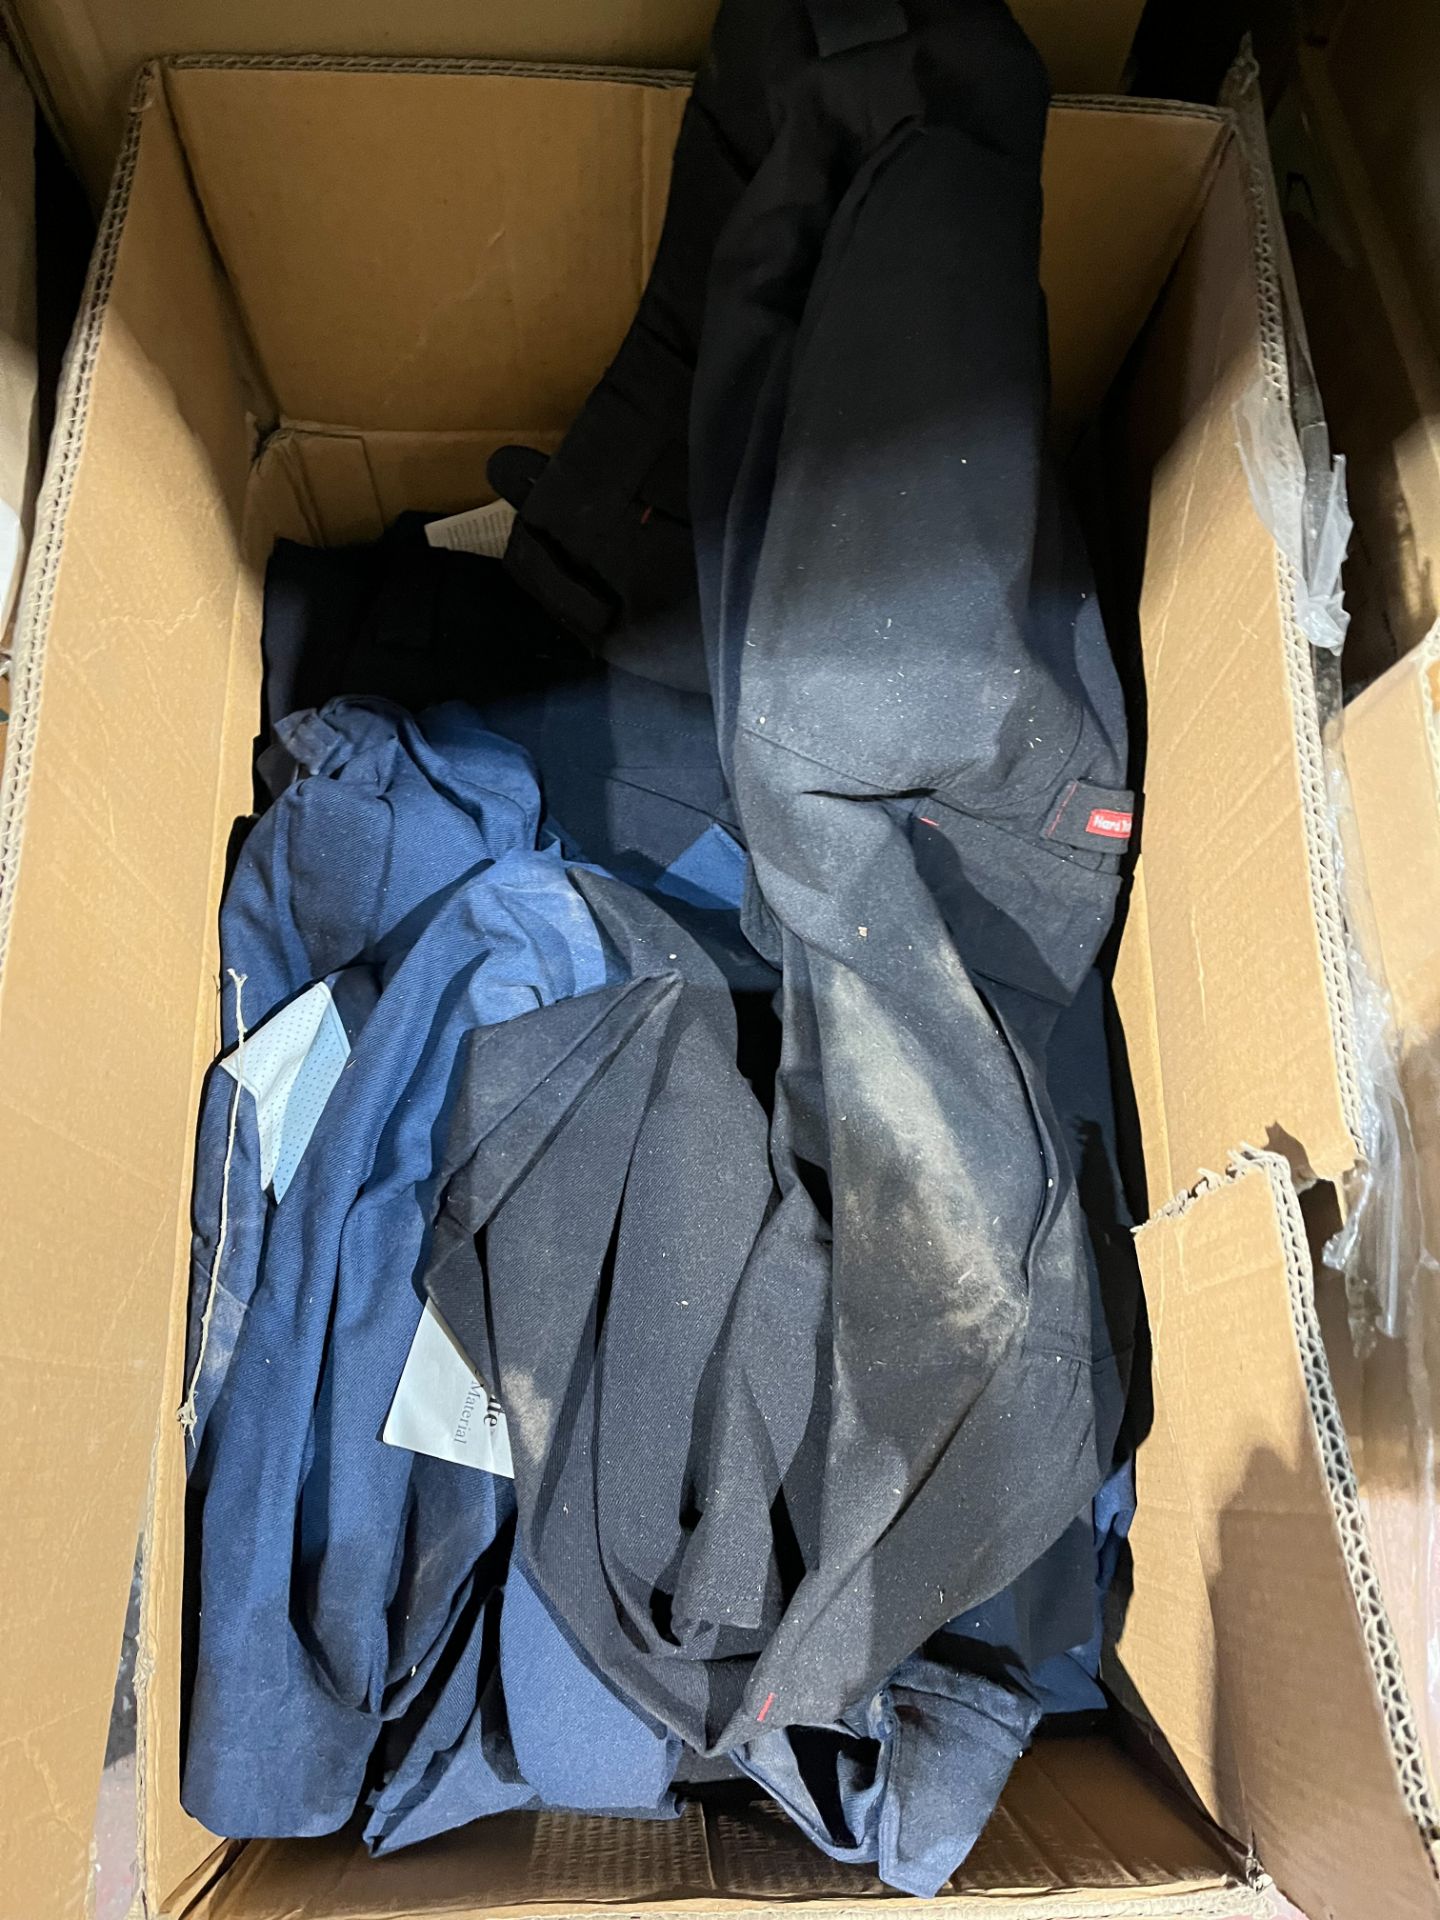 32 PIECE MIXED WORKWEAR LOT INCLUDING SHIRTS, COVERALLS ETC R3-5